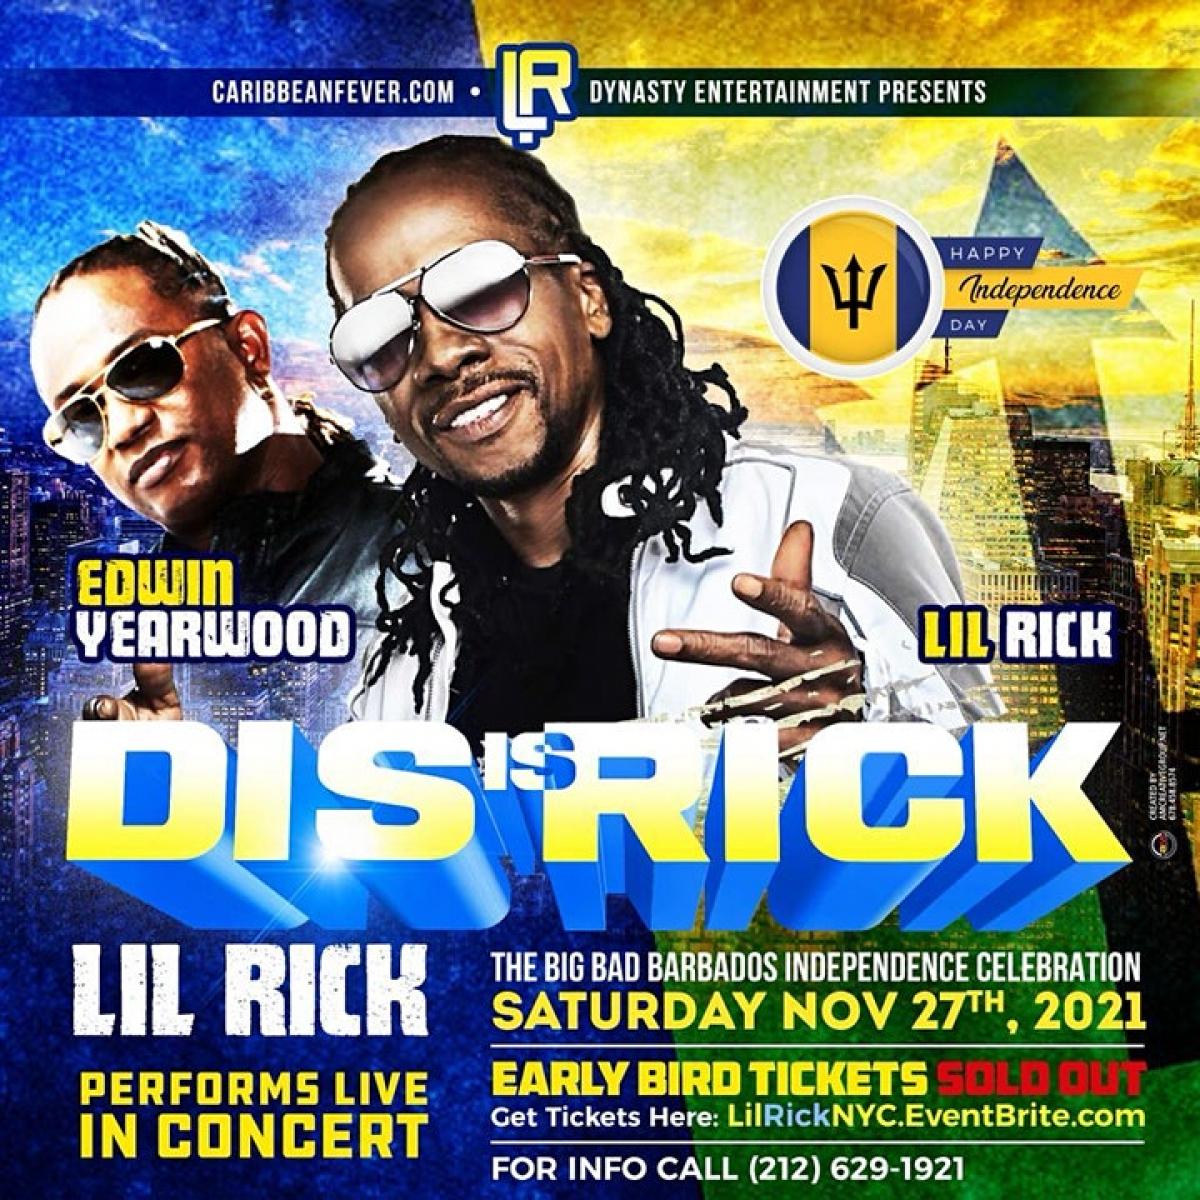 Dis Is Rick NYC flyer or graphic.